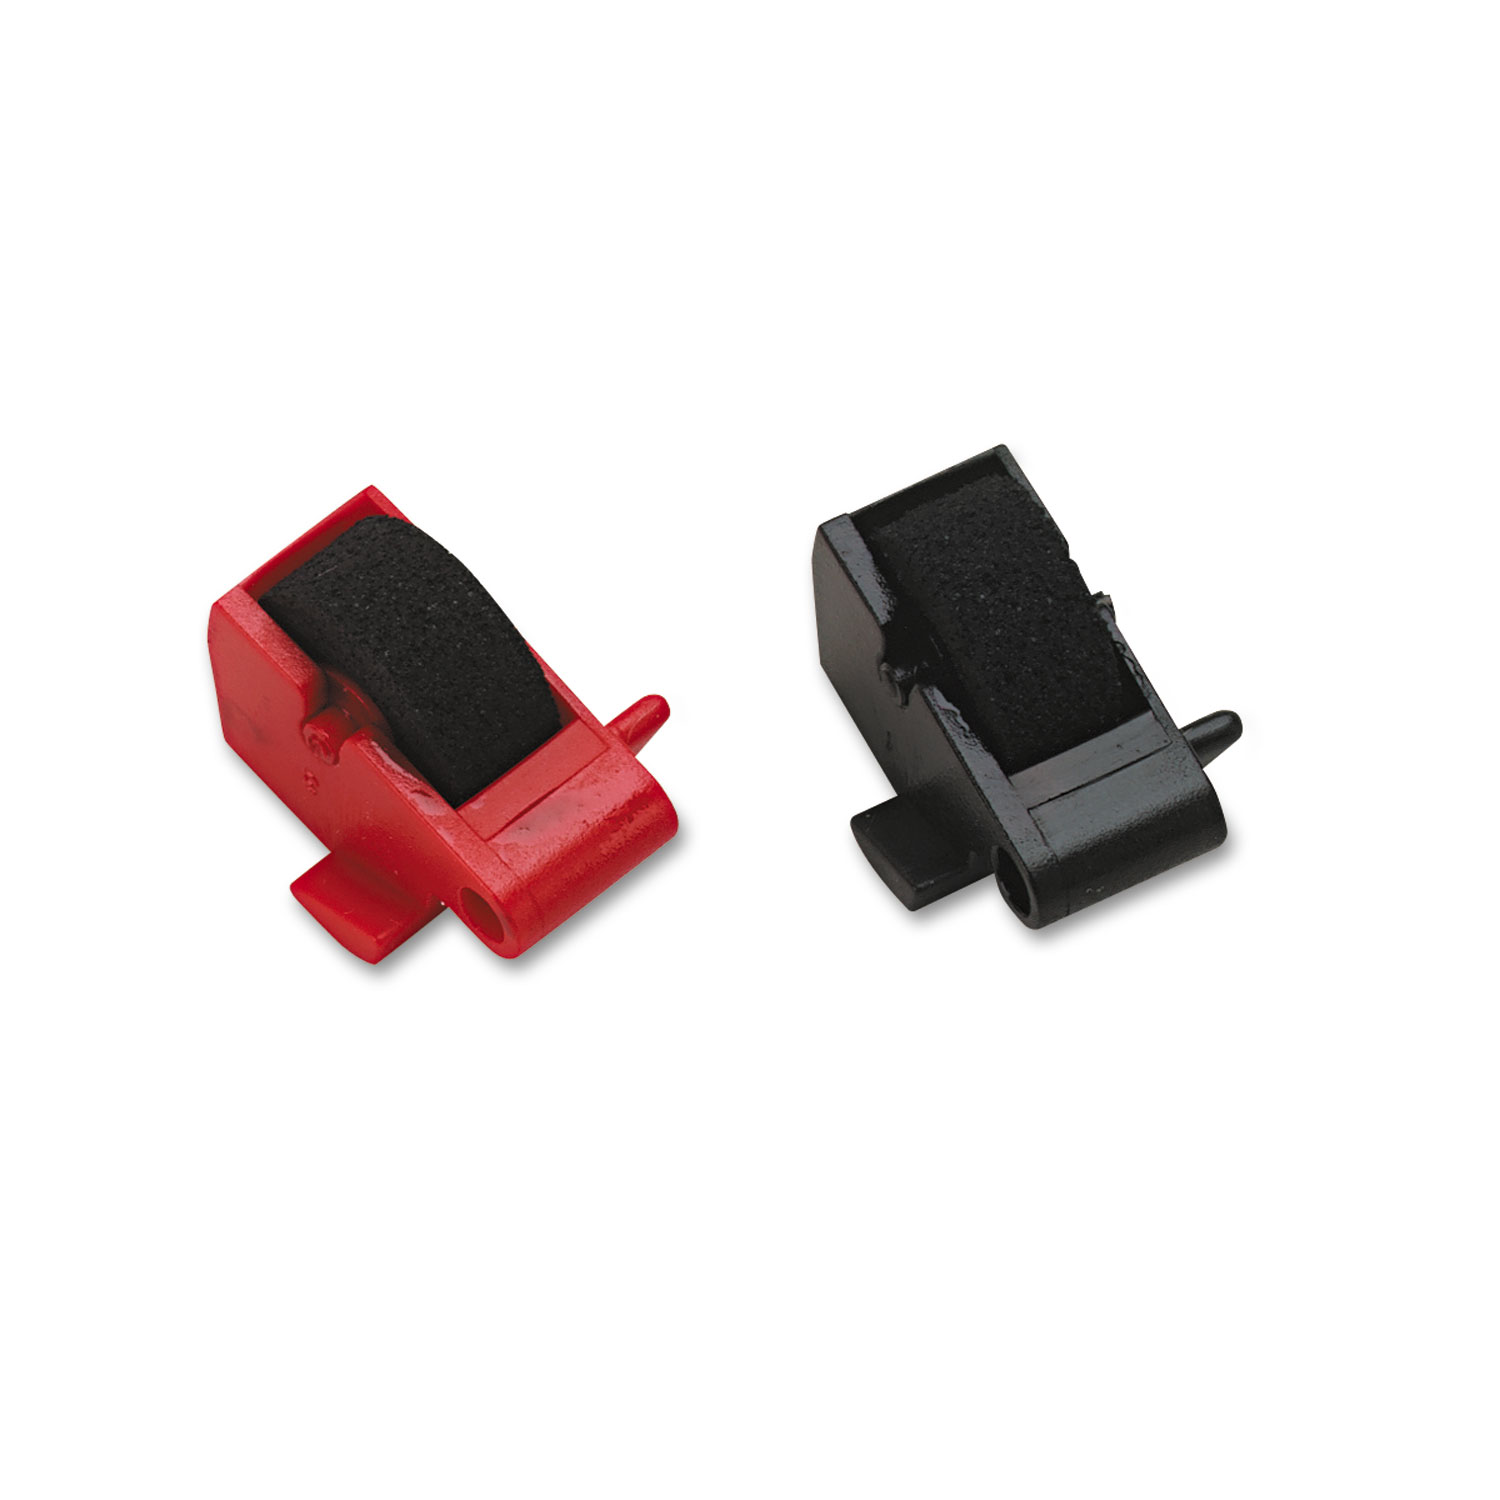  Dataproducts R14772 R14772 Compatible Ink Rollers, Black/Red, 2/Pack (DPSR14772) 